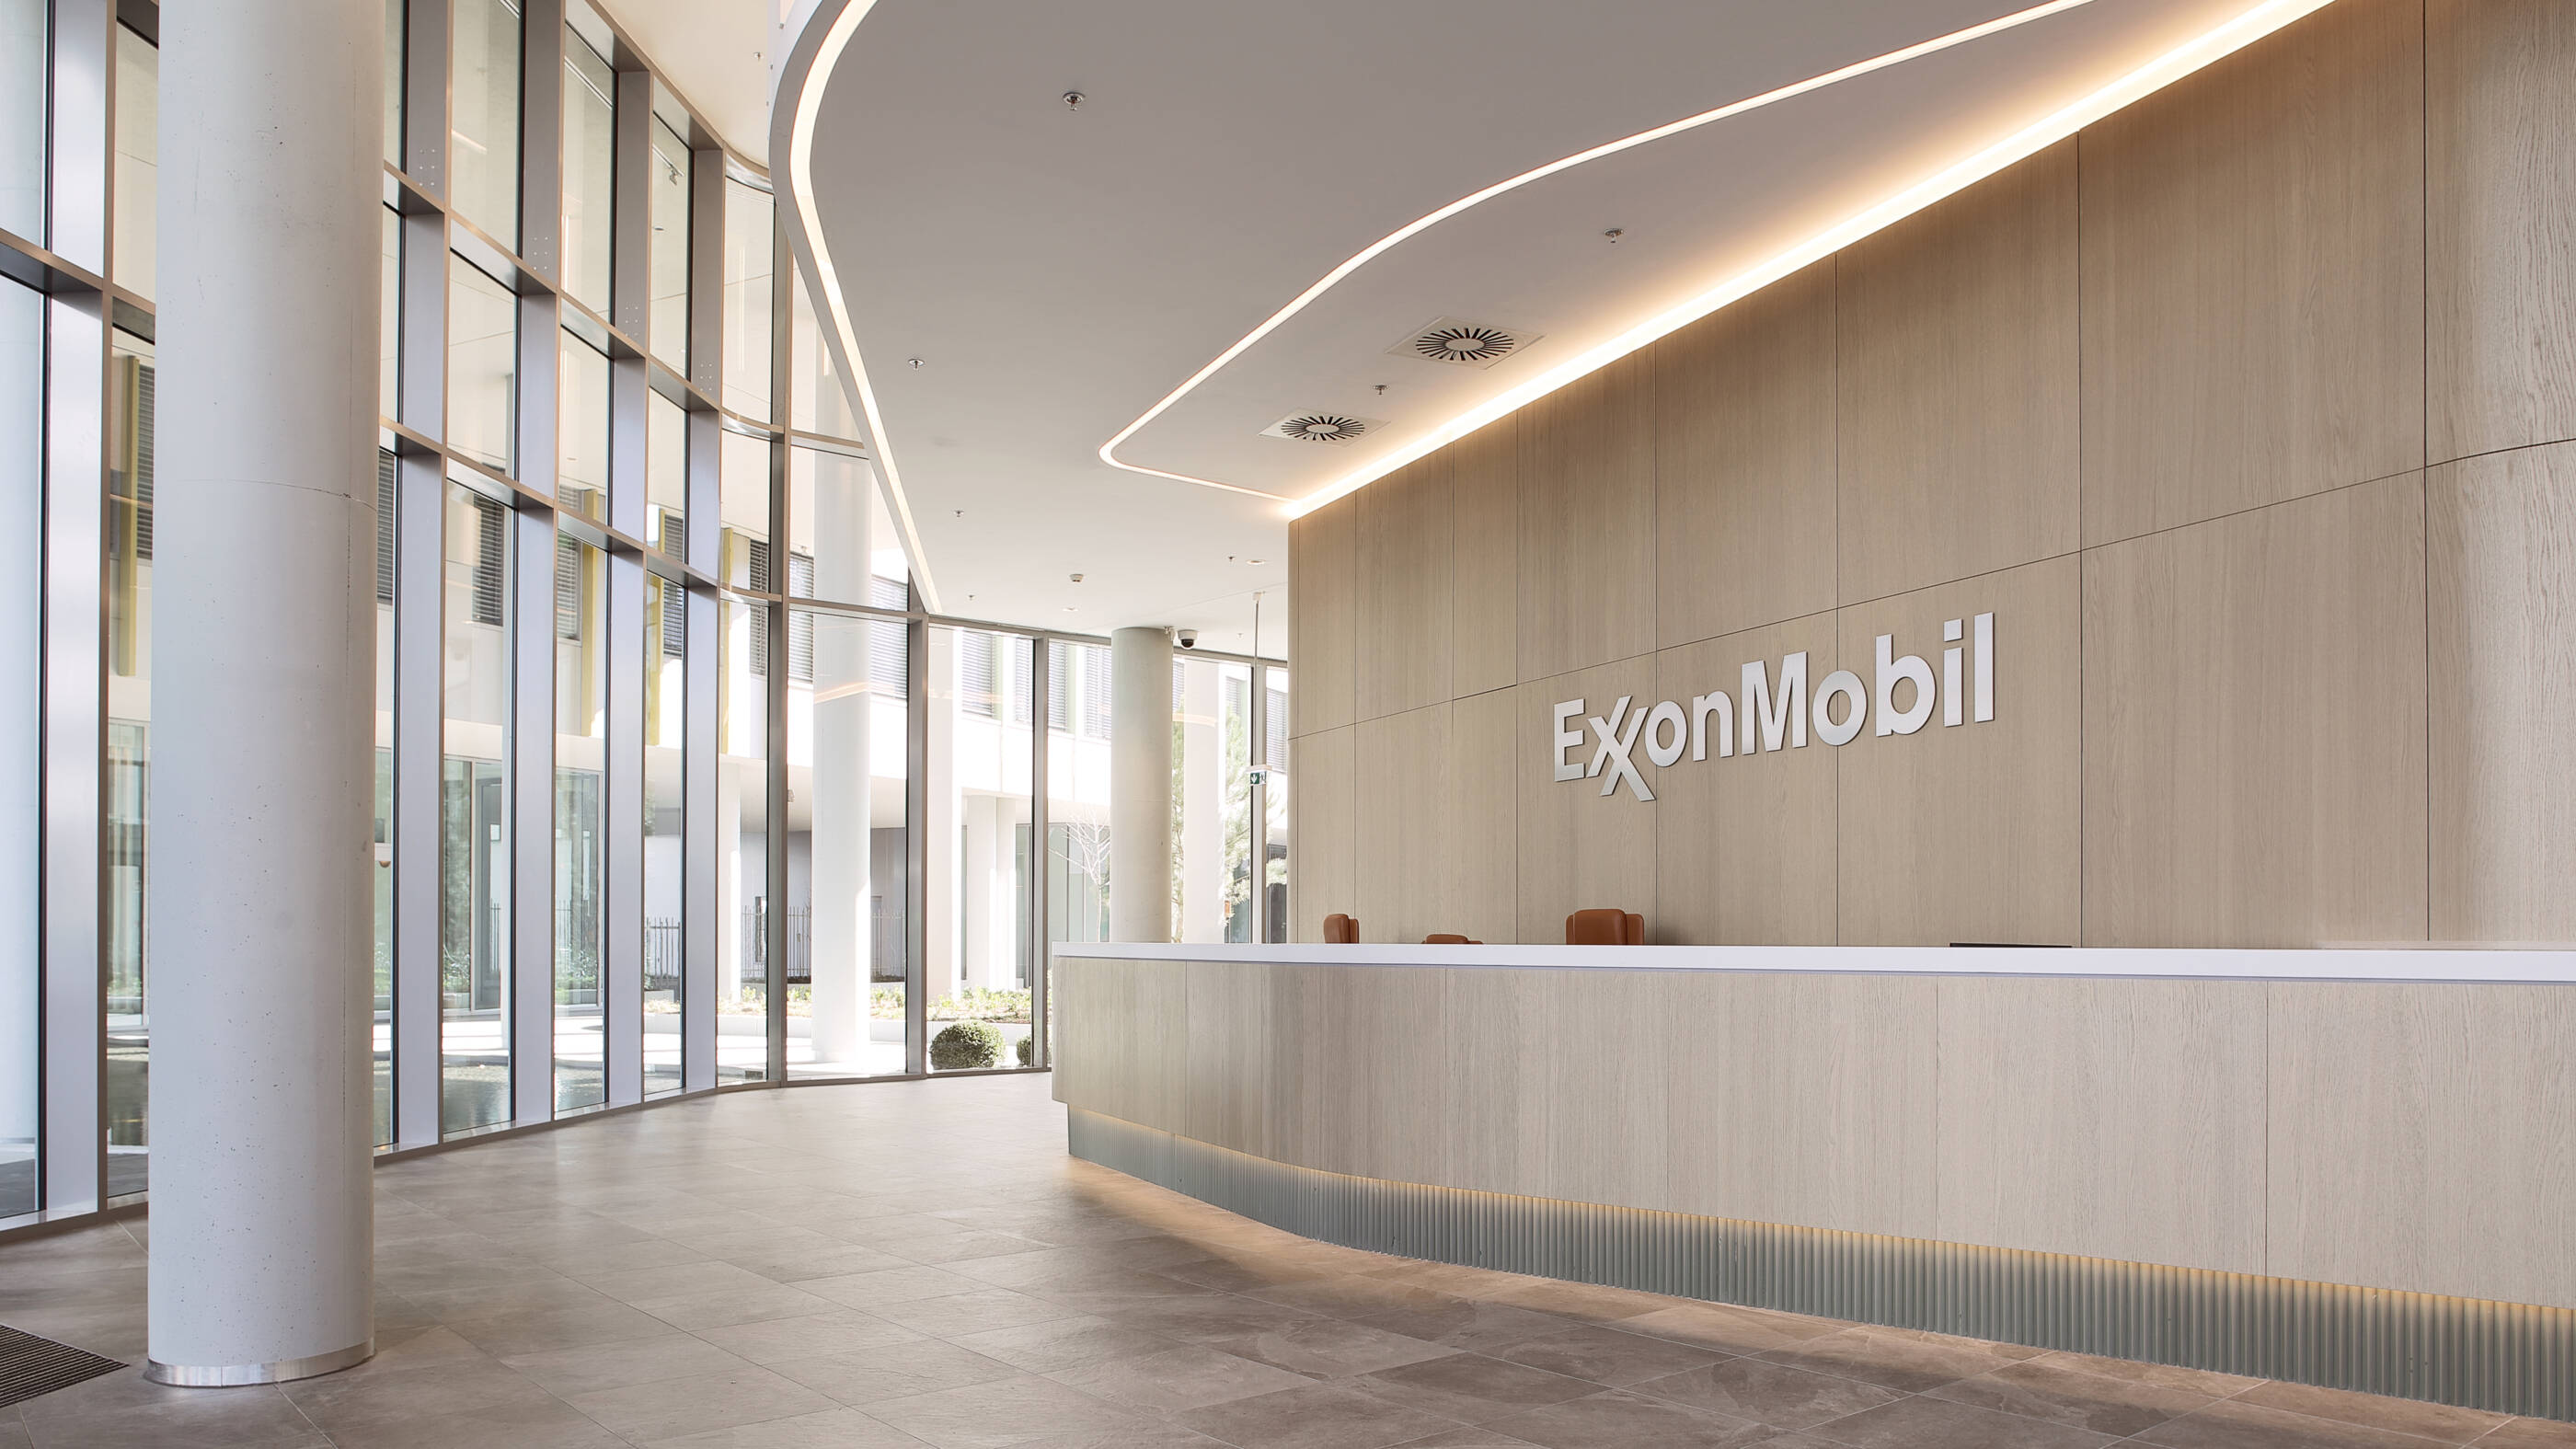 About ExxonMobil in Hungary